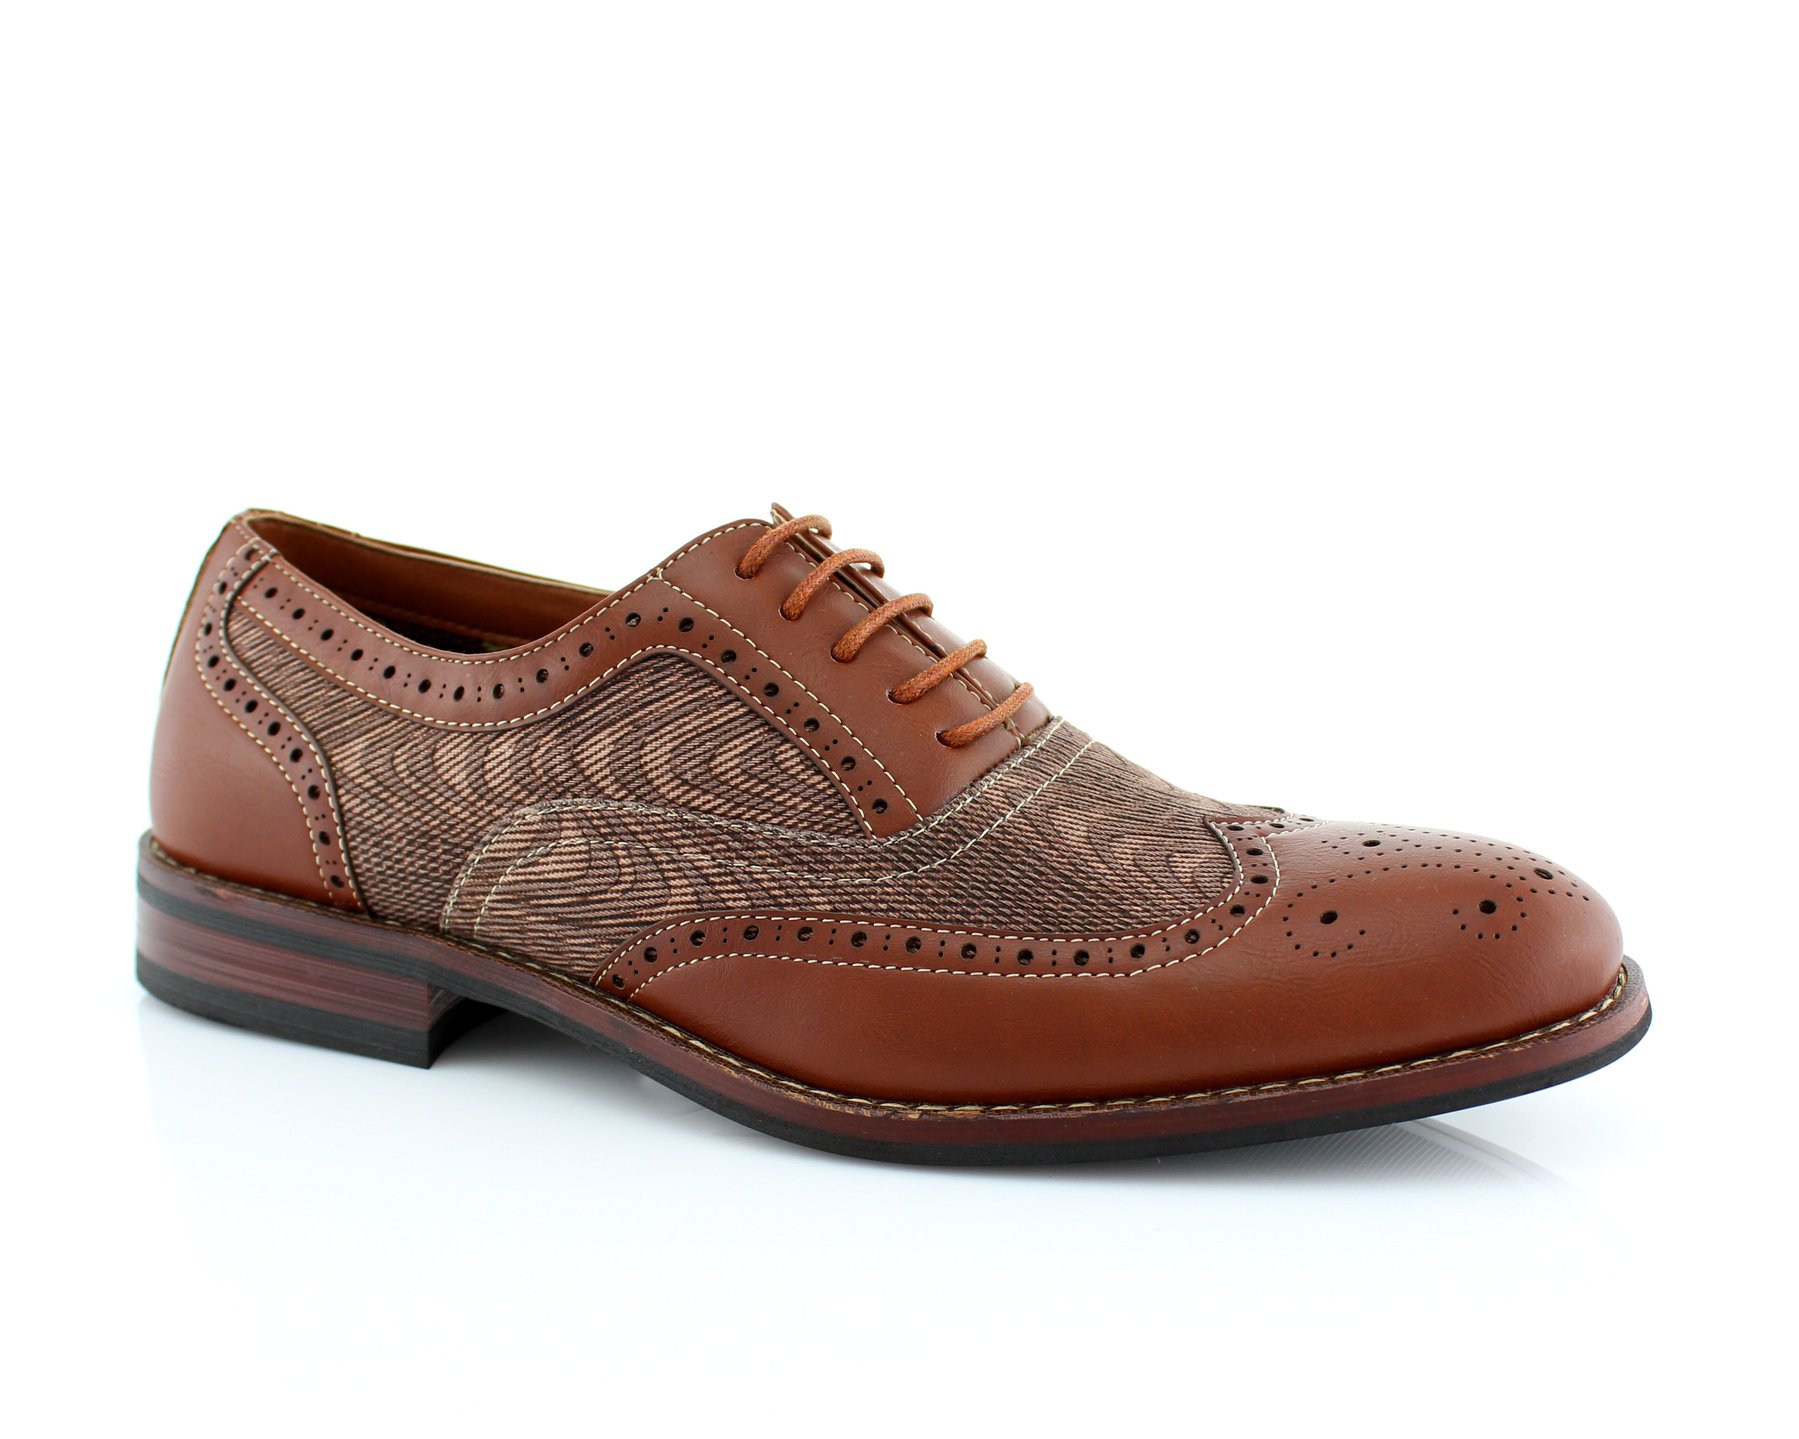 Ferro Aldo Alan M139001G Mens Classic Perforated Duo-Texture Lace-up Wingtip Oxford Dress Shoes - image 1 of 2